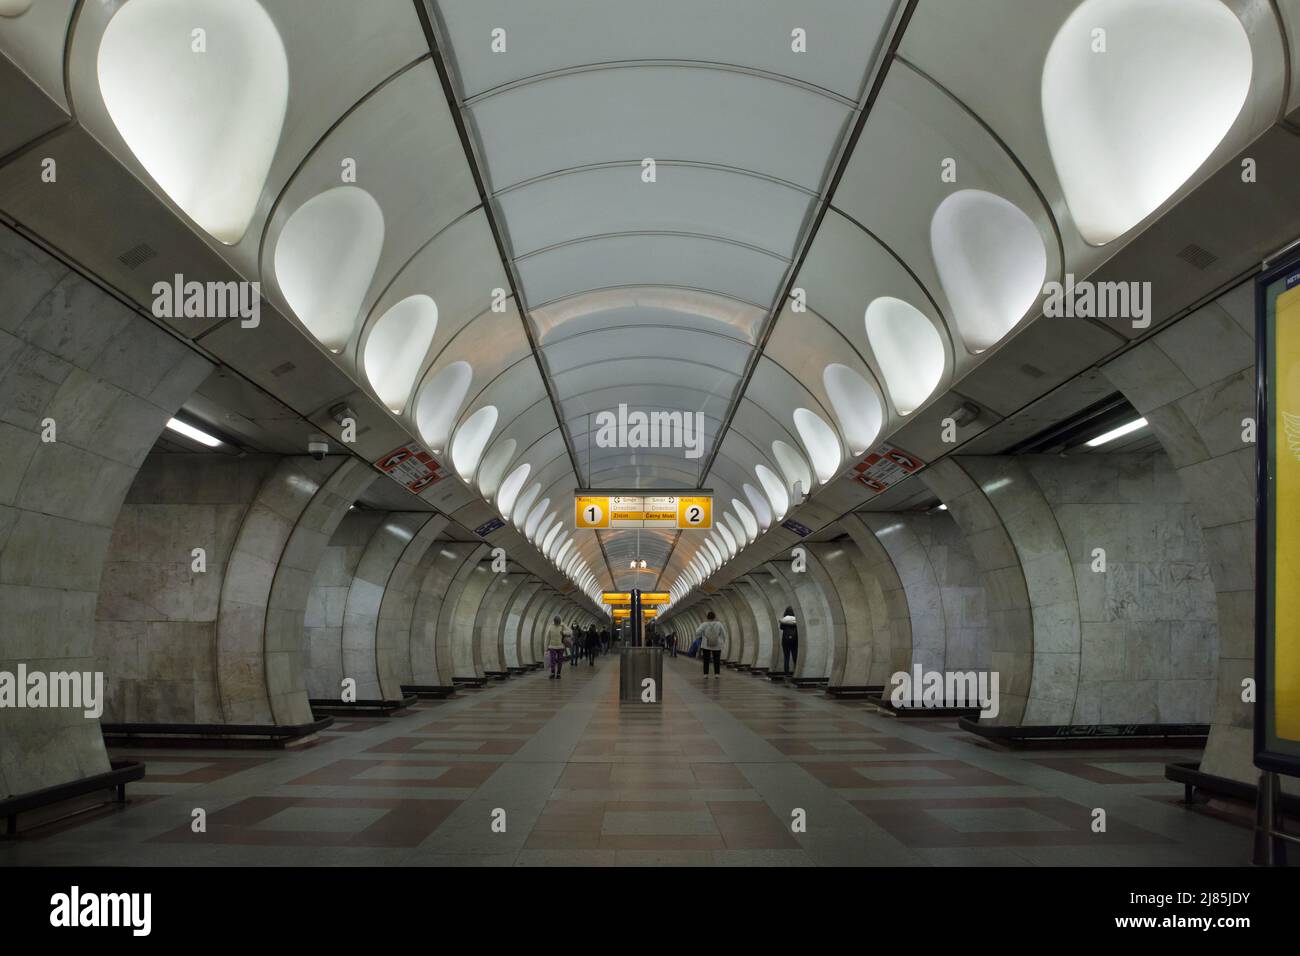 Interior of Anděl Station of the Prague Metro in Prague, Czech Republic. The underground station previously known as Moskevská Station (Moscow Station) was designed by Soviet modernist architect Lev Popov and completed in 1985. Lamps in the shape of eggs are very typical for his projects of underground stations. Stock Photo